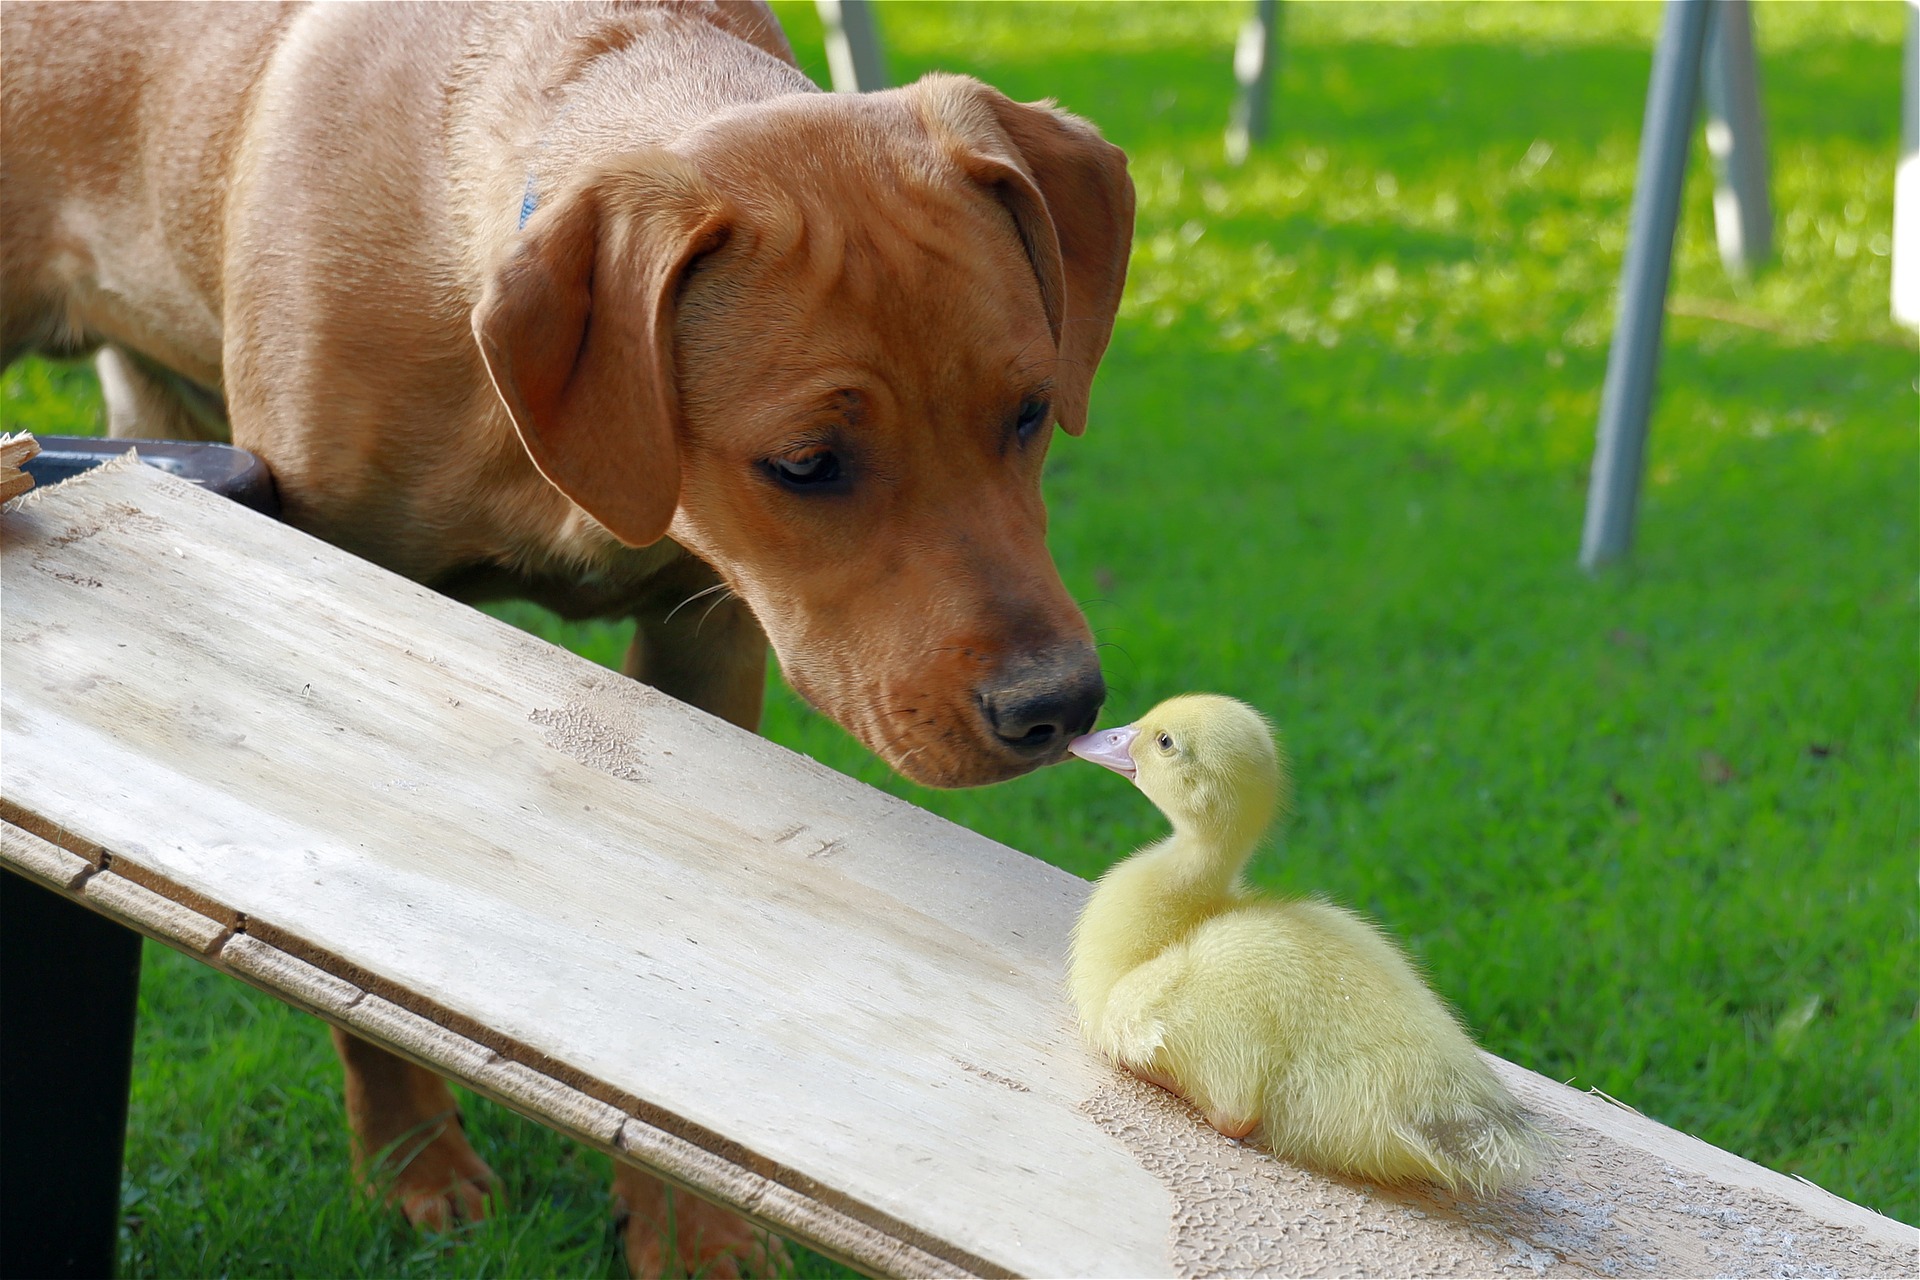 Dog sniffing duckling